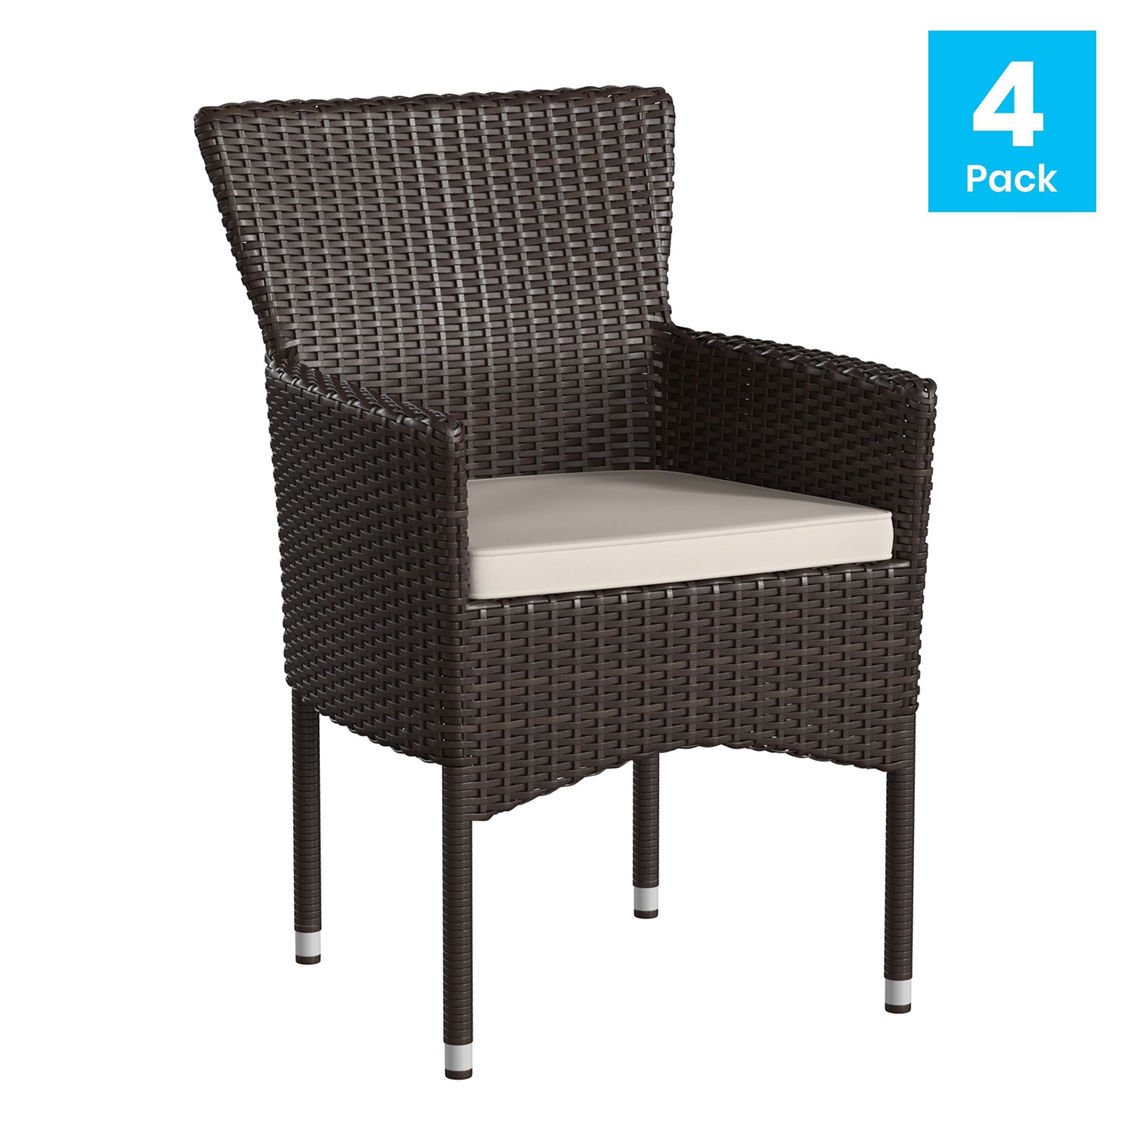 Flash Furniture 4PK Wicker Patio Chairs & Cushions - Image 4 of 5